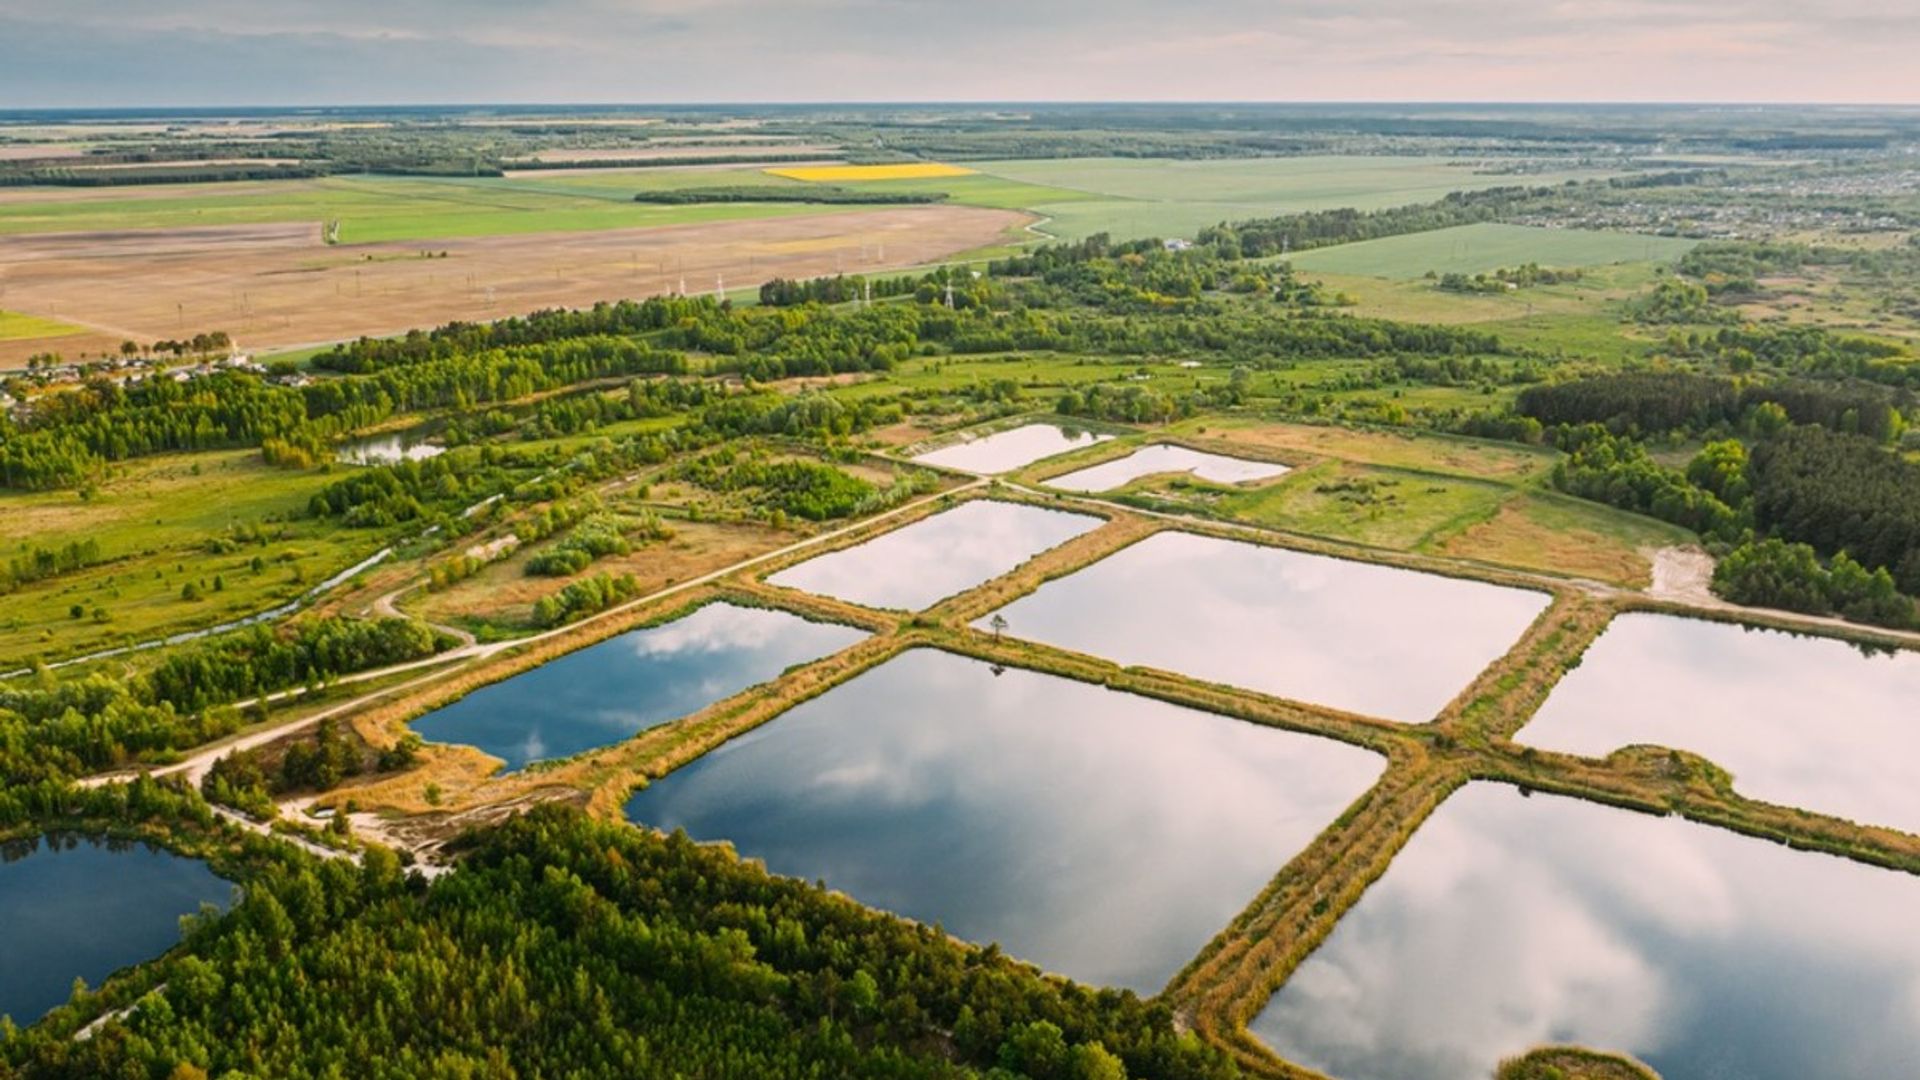 Image of water reservoirs in a field